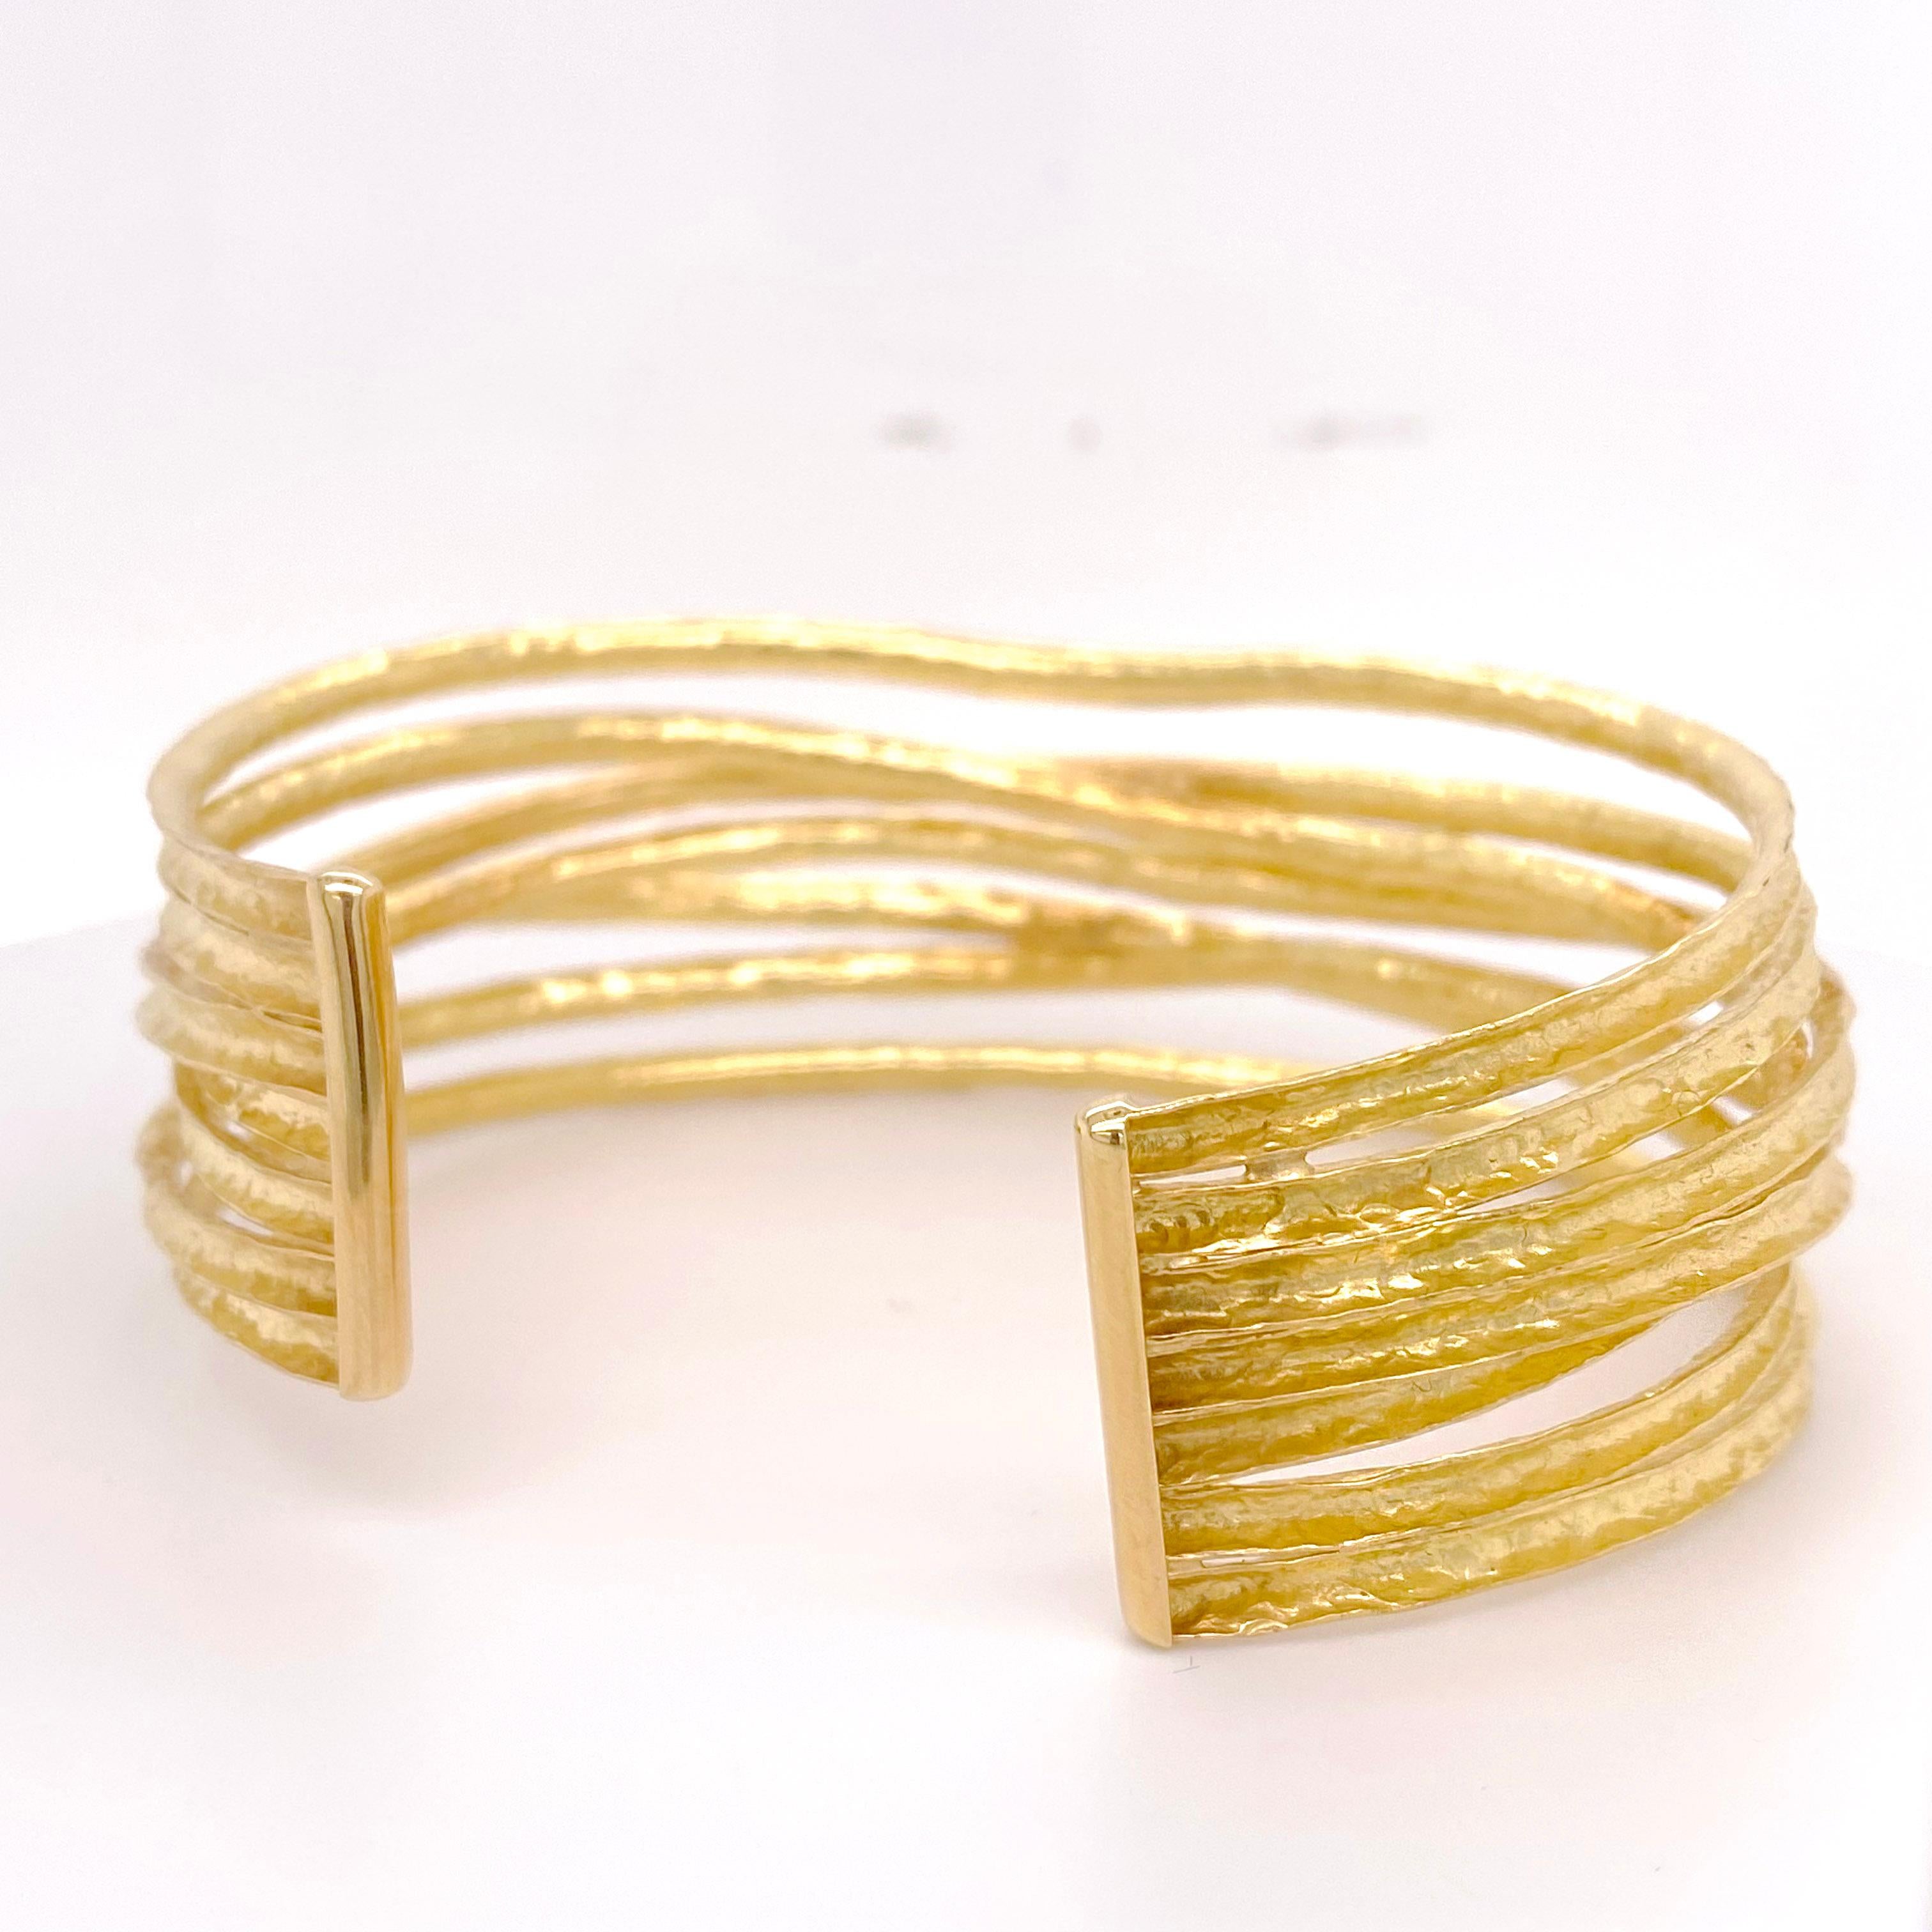 Contemporary Gold Bangle Bracelet, 18k Yellow Gold Layered Cuff w Texture